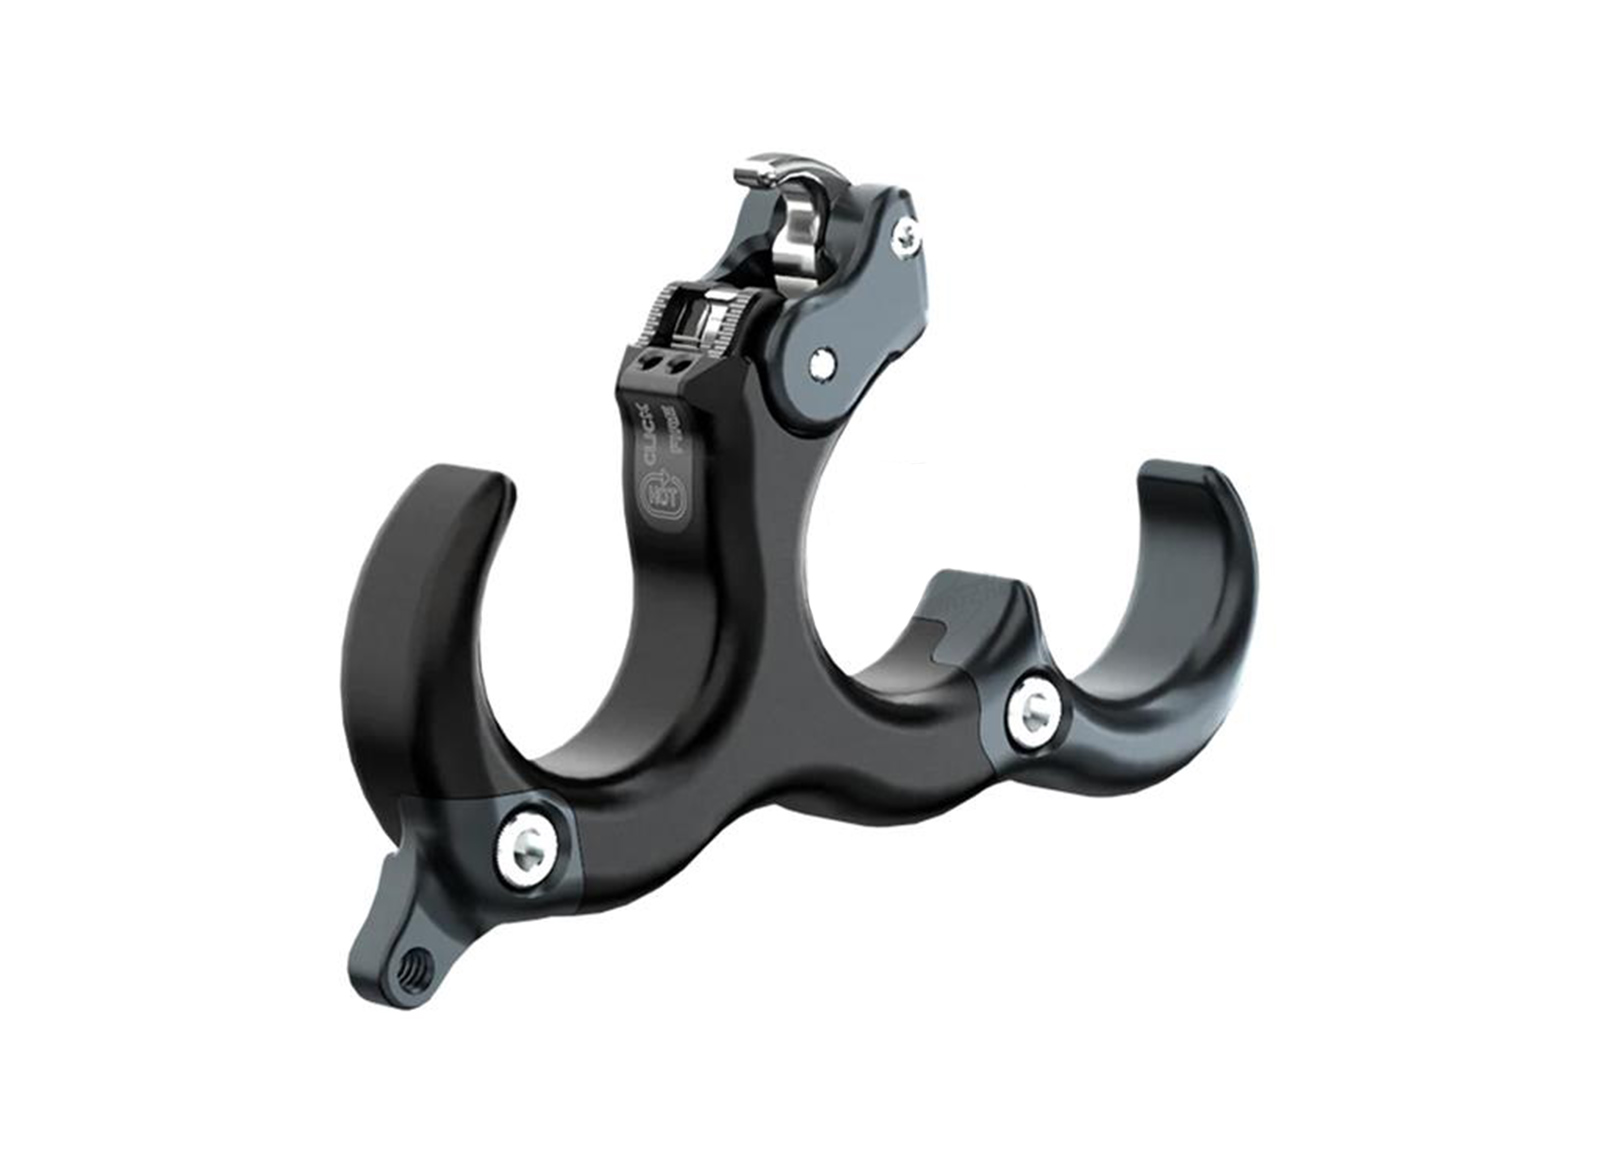 ULTRAVIEW SGANCIO BACK TENSION THE HINGE 2 LARGE ANODIZED ALUMINUM